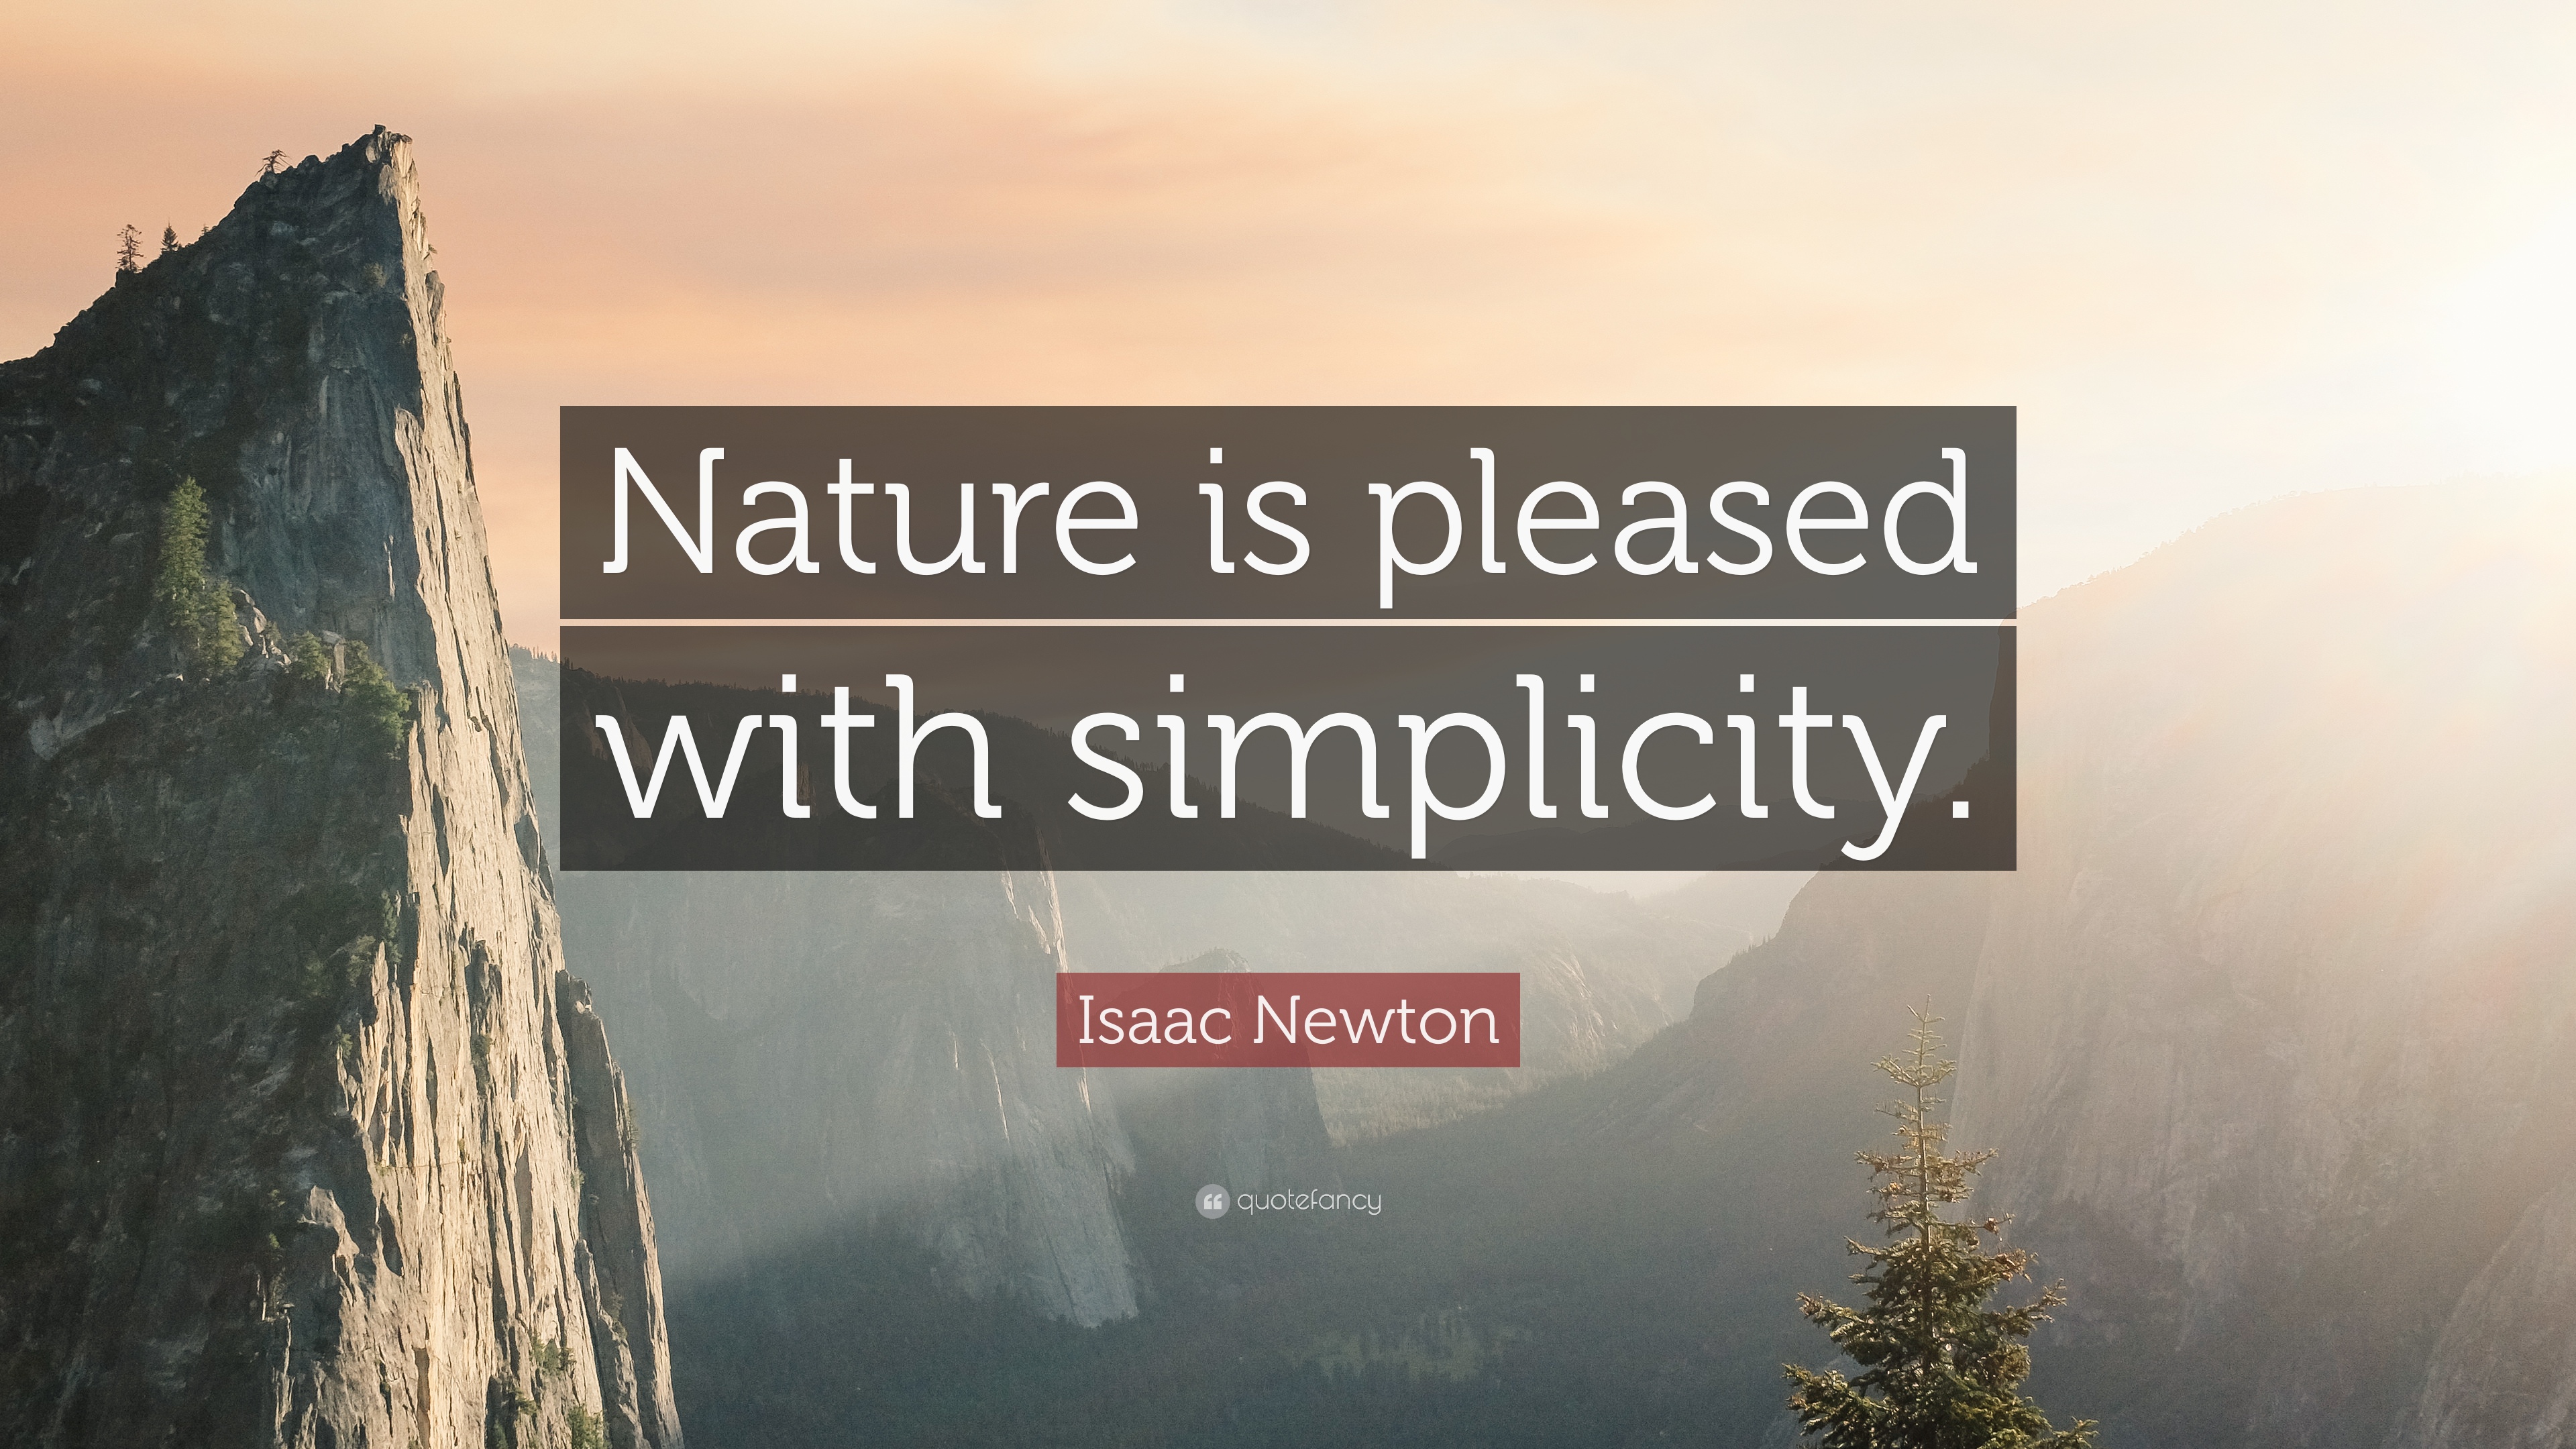 Isaac Newton Quote: “Nature is pleased with simplicity.” 18